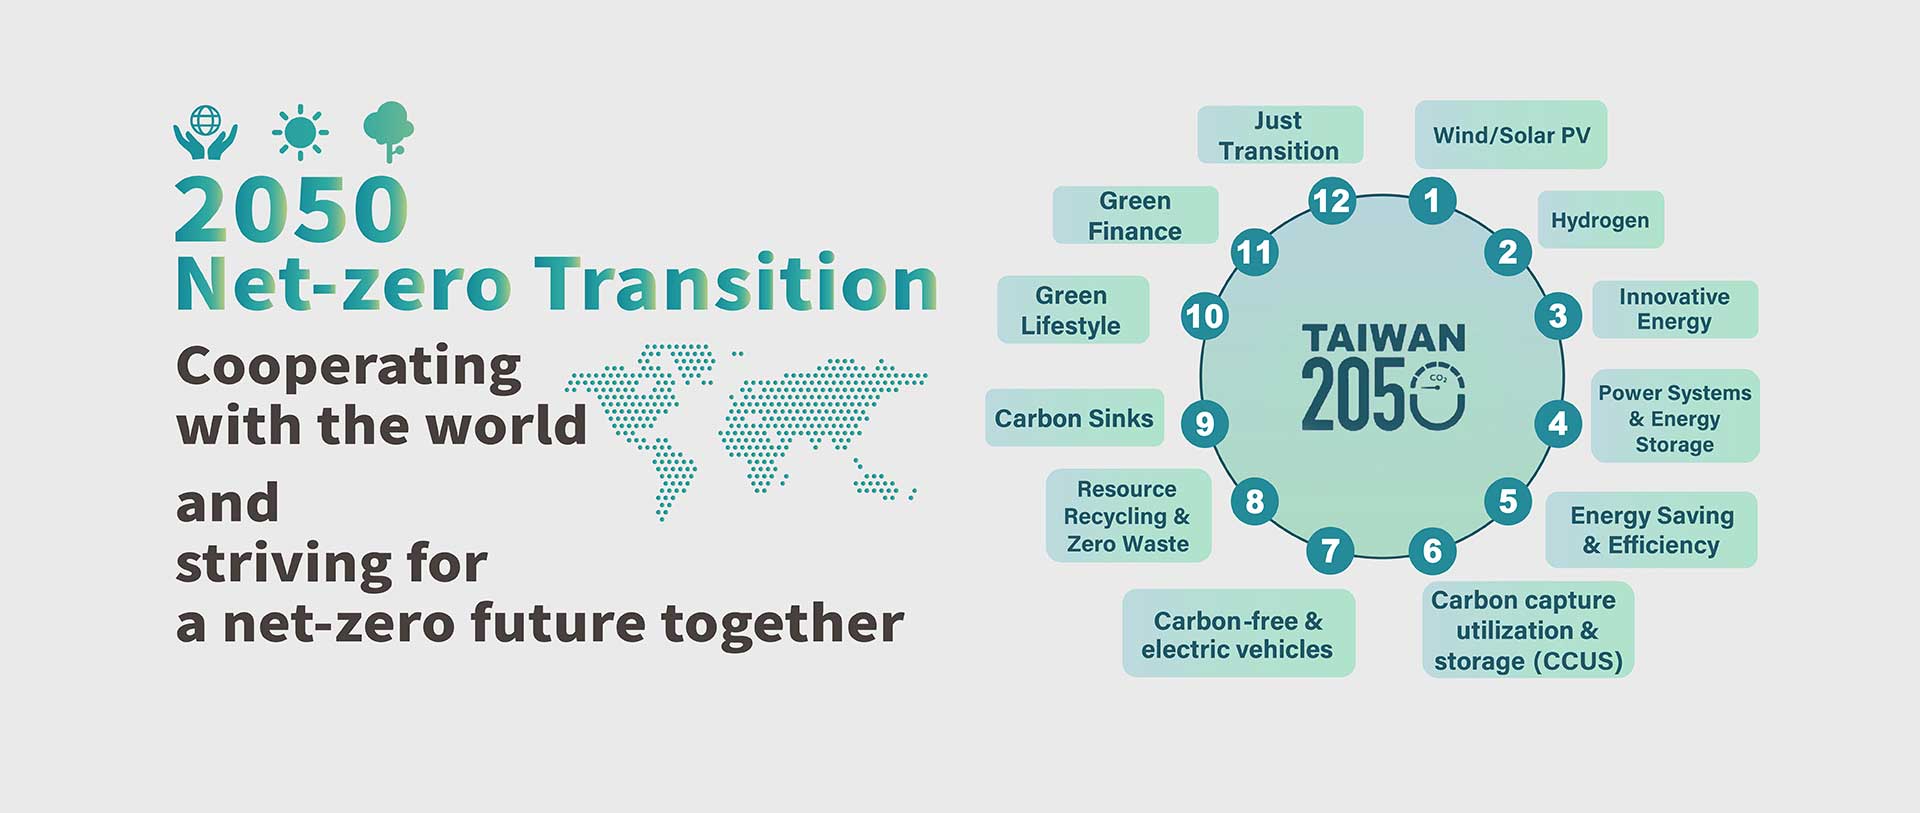 Taiwan’s Pathway to Net-Zero Emissions in 2050